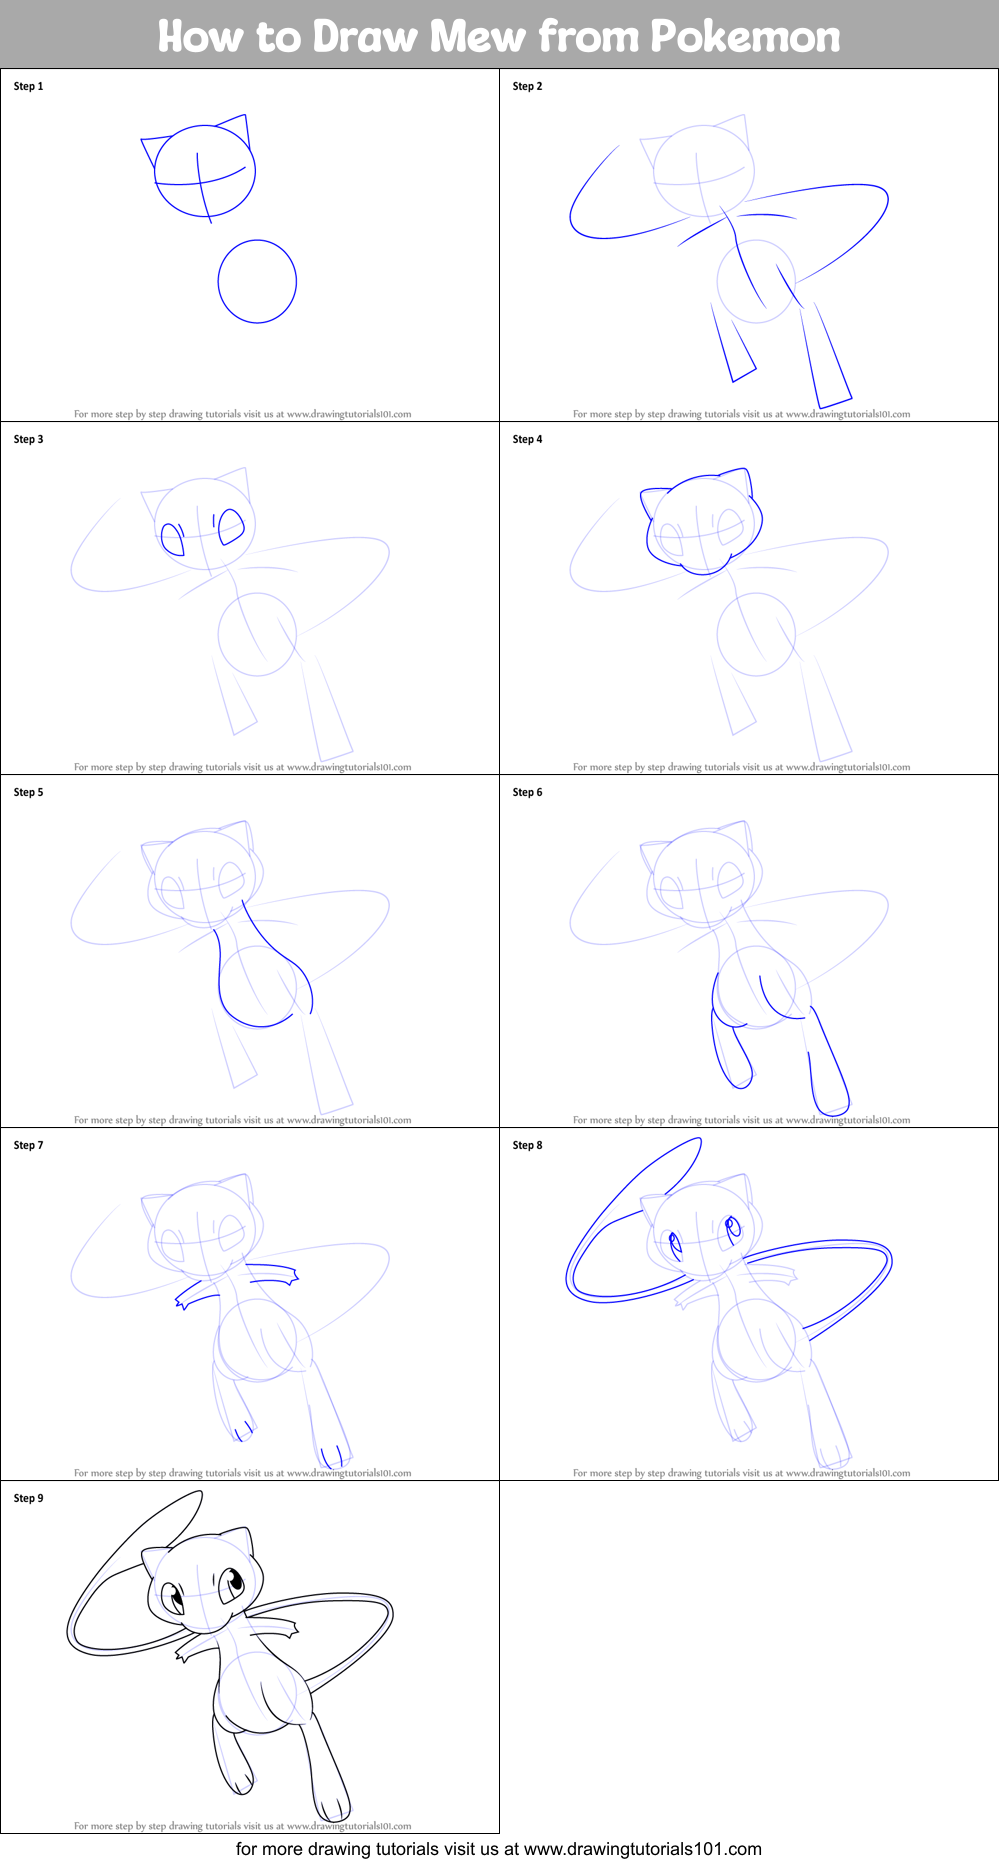 How to Draw Mew from Pokemon printable step by step drawing sheet